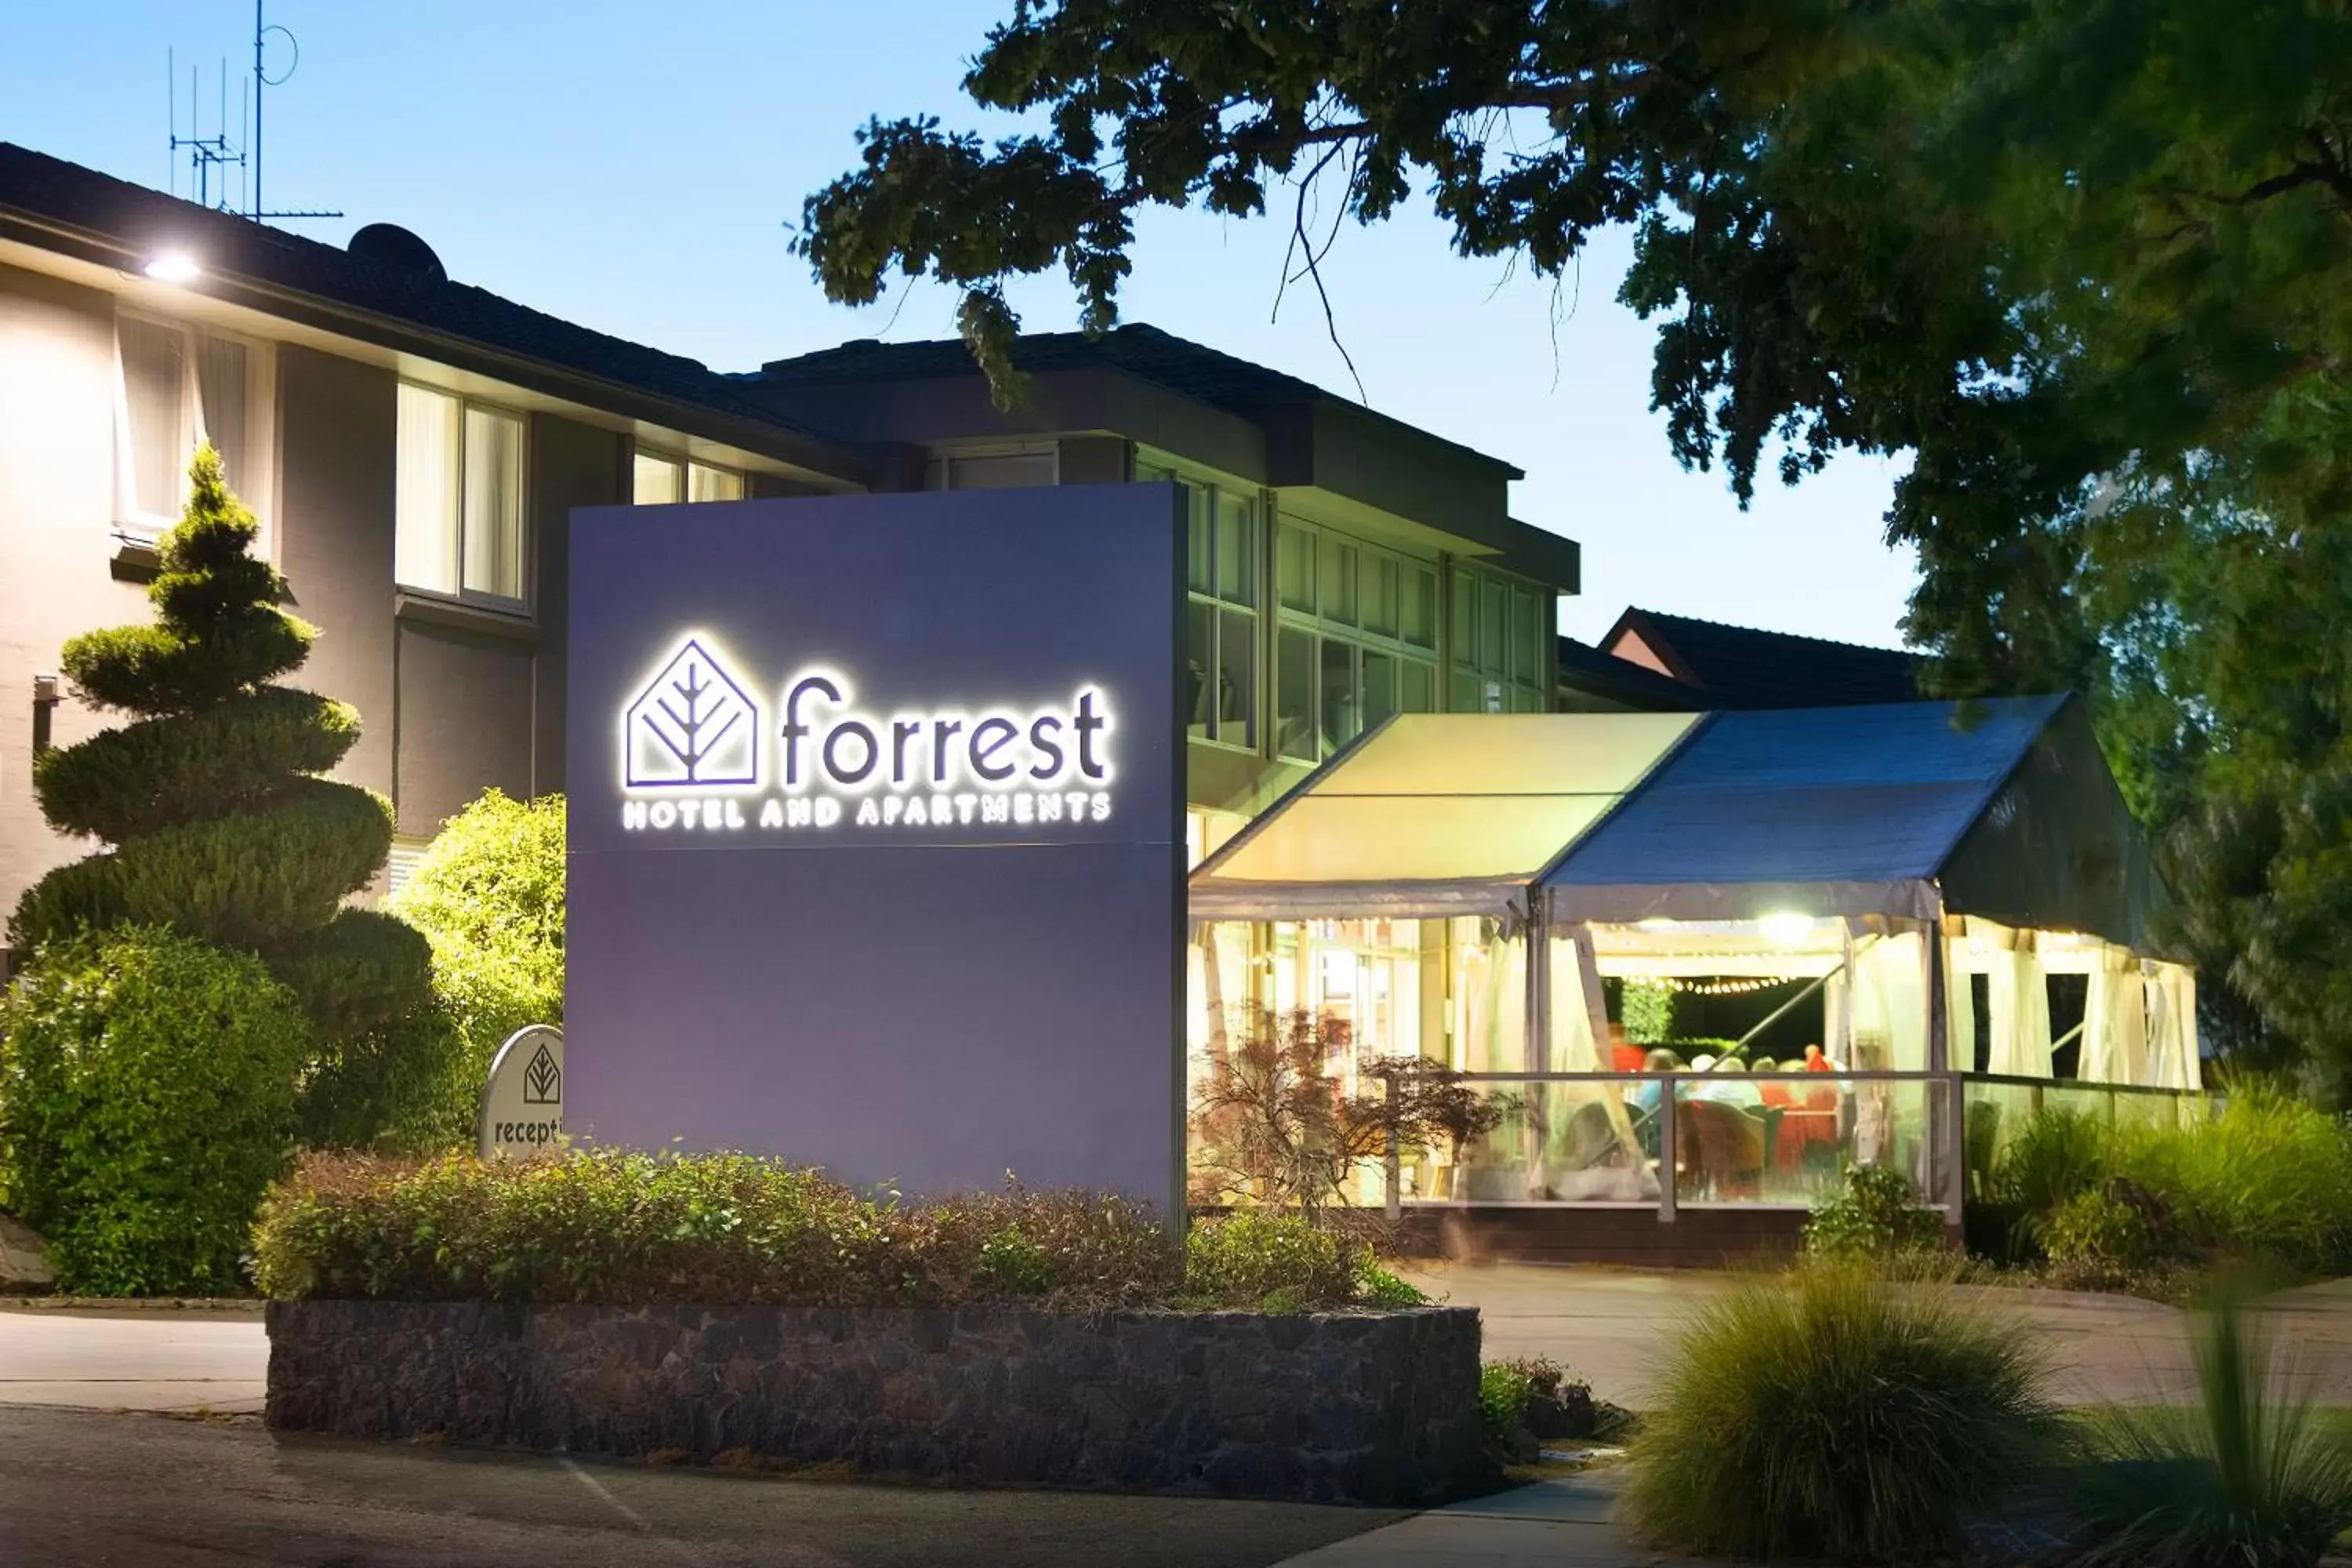 Property logo or sign, Property Building in Forrest Hotel & Apartments